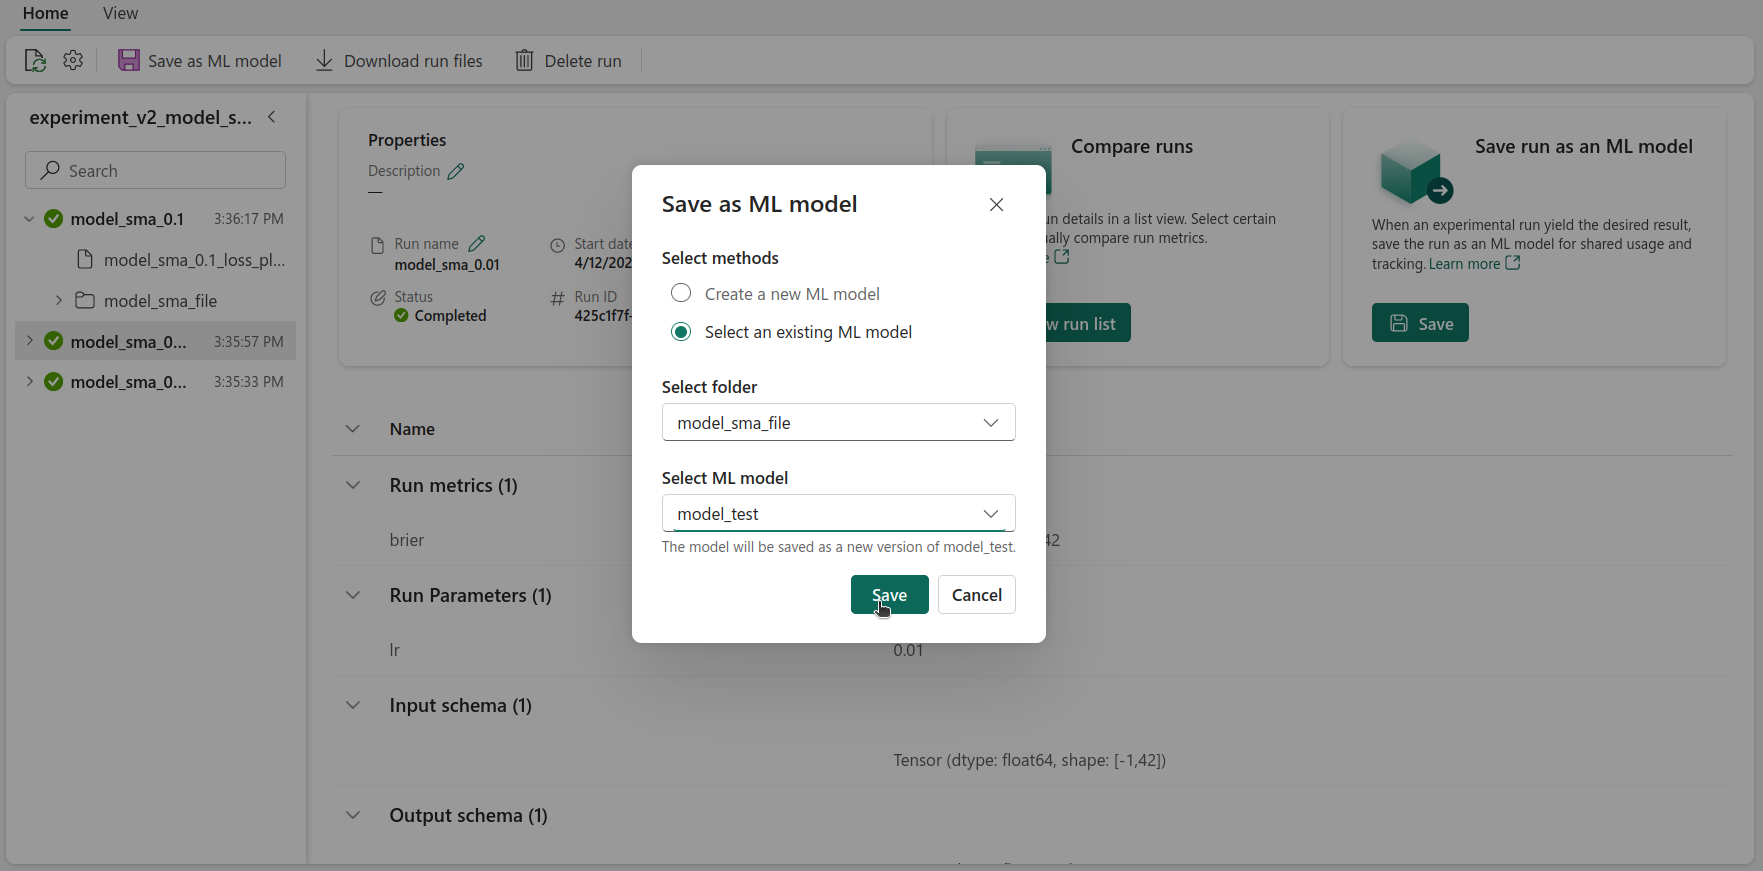 After selecting save in the save run as ML Model section, a pop up box shows up to select the model files and the ML Model to save the files to.